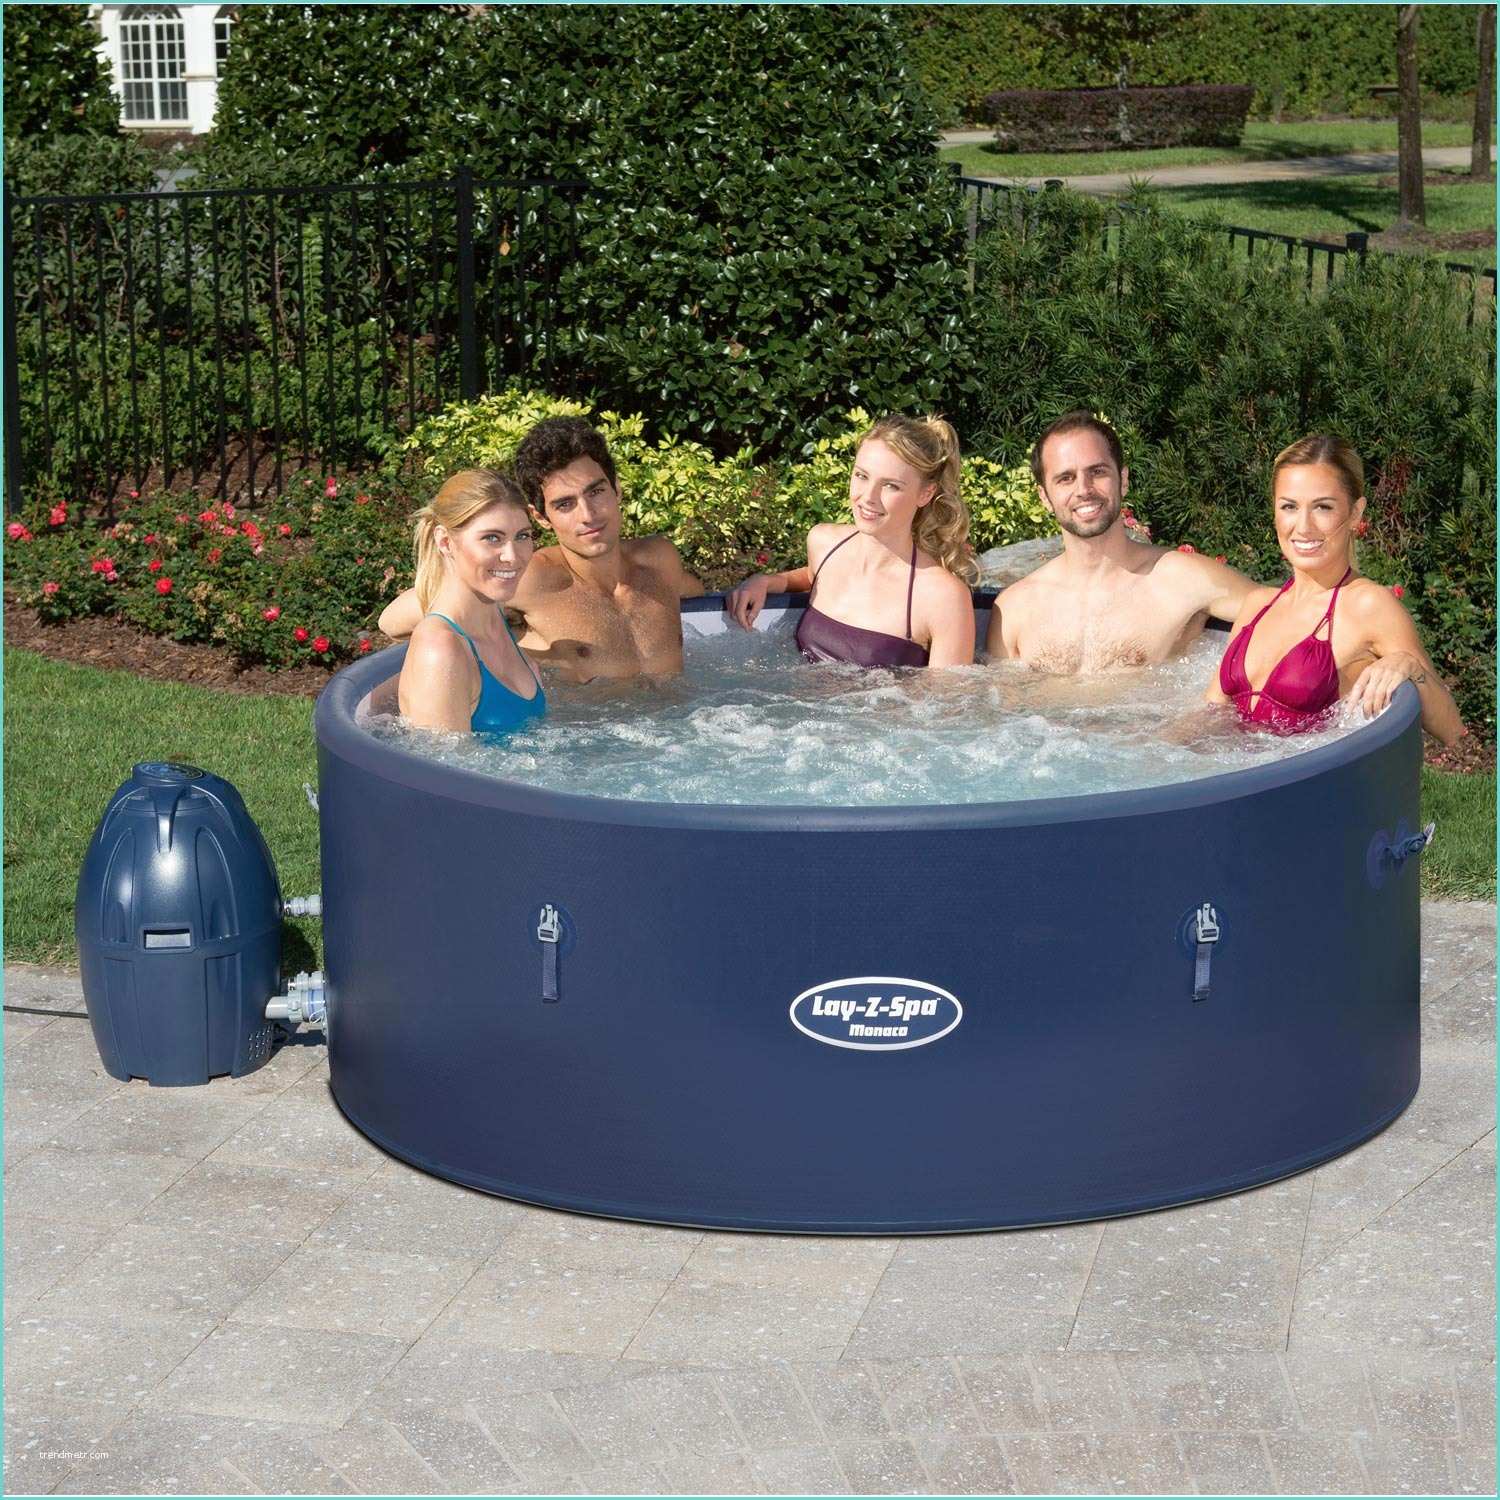 Spa Gonflable Foirfouille Spa Gonflable Bestway Monaco Rond 6 Places assises